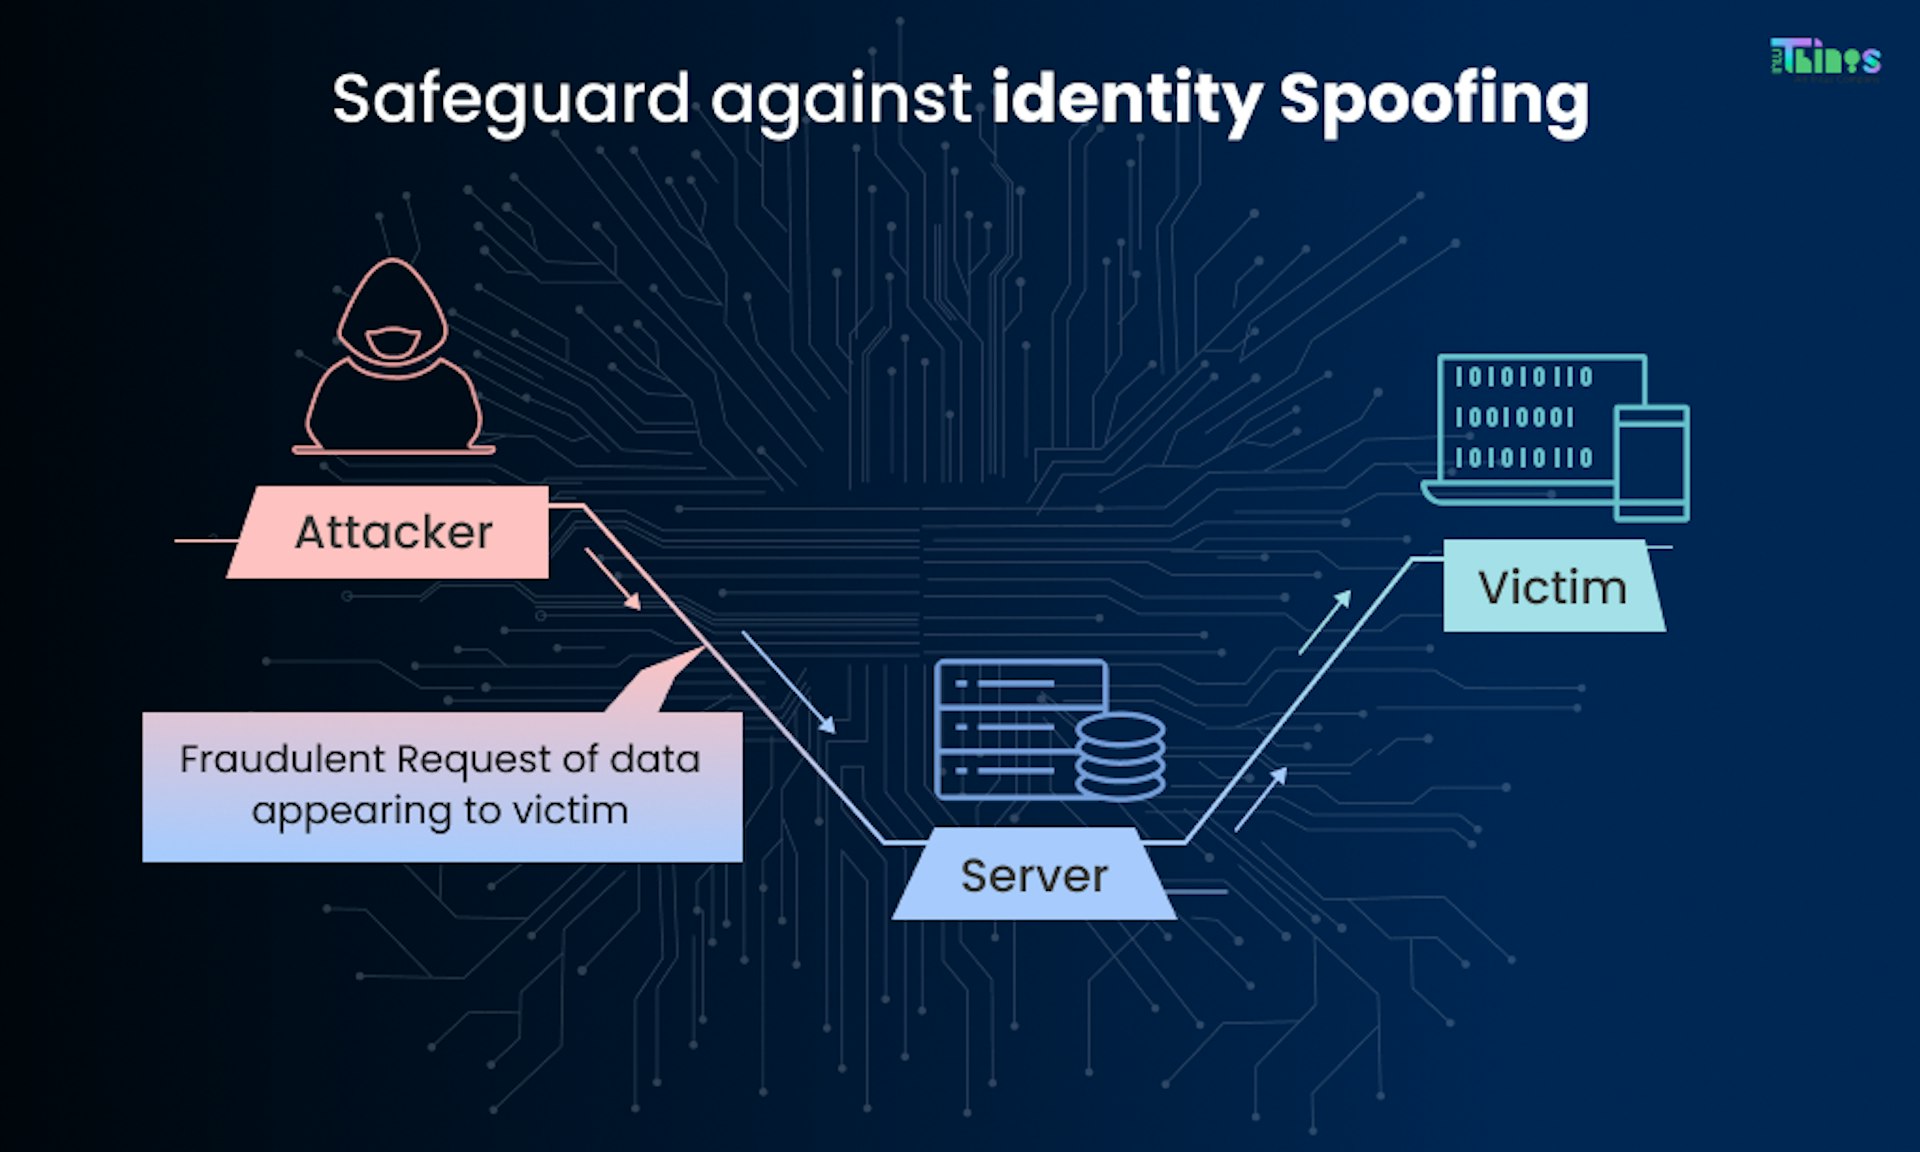 Safeguard against identity spoofing